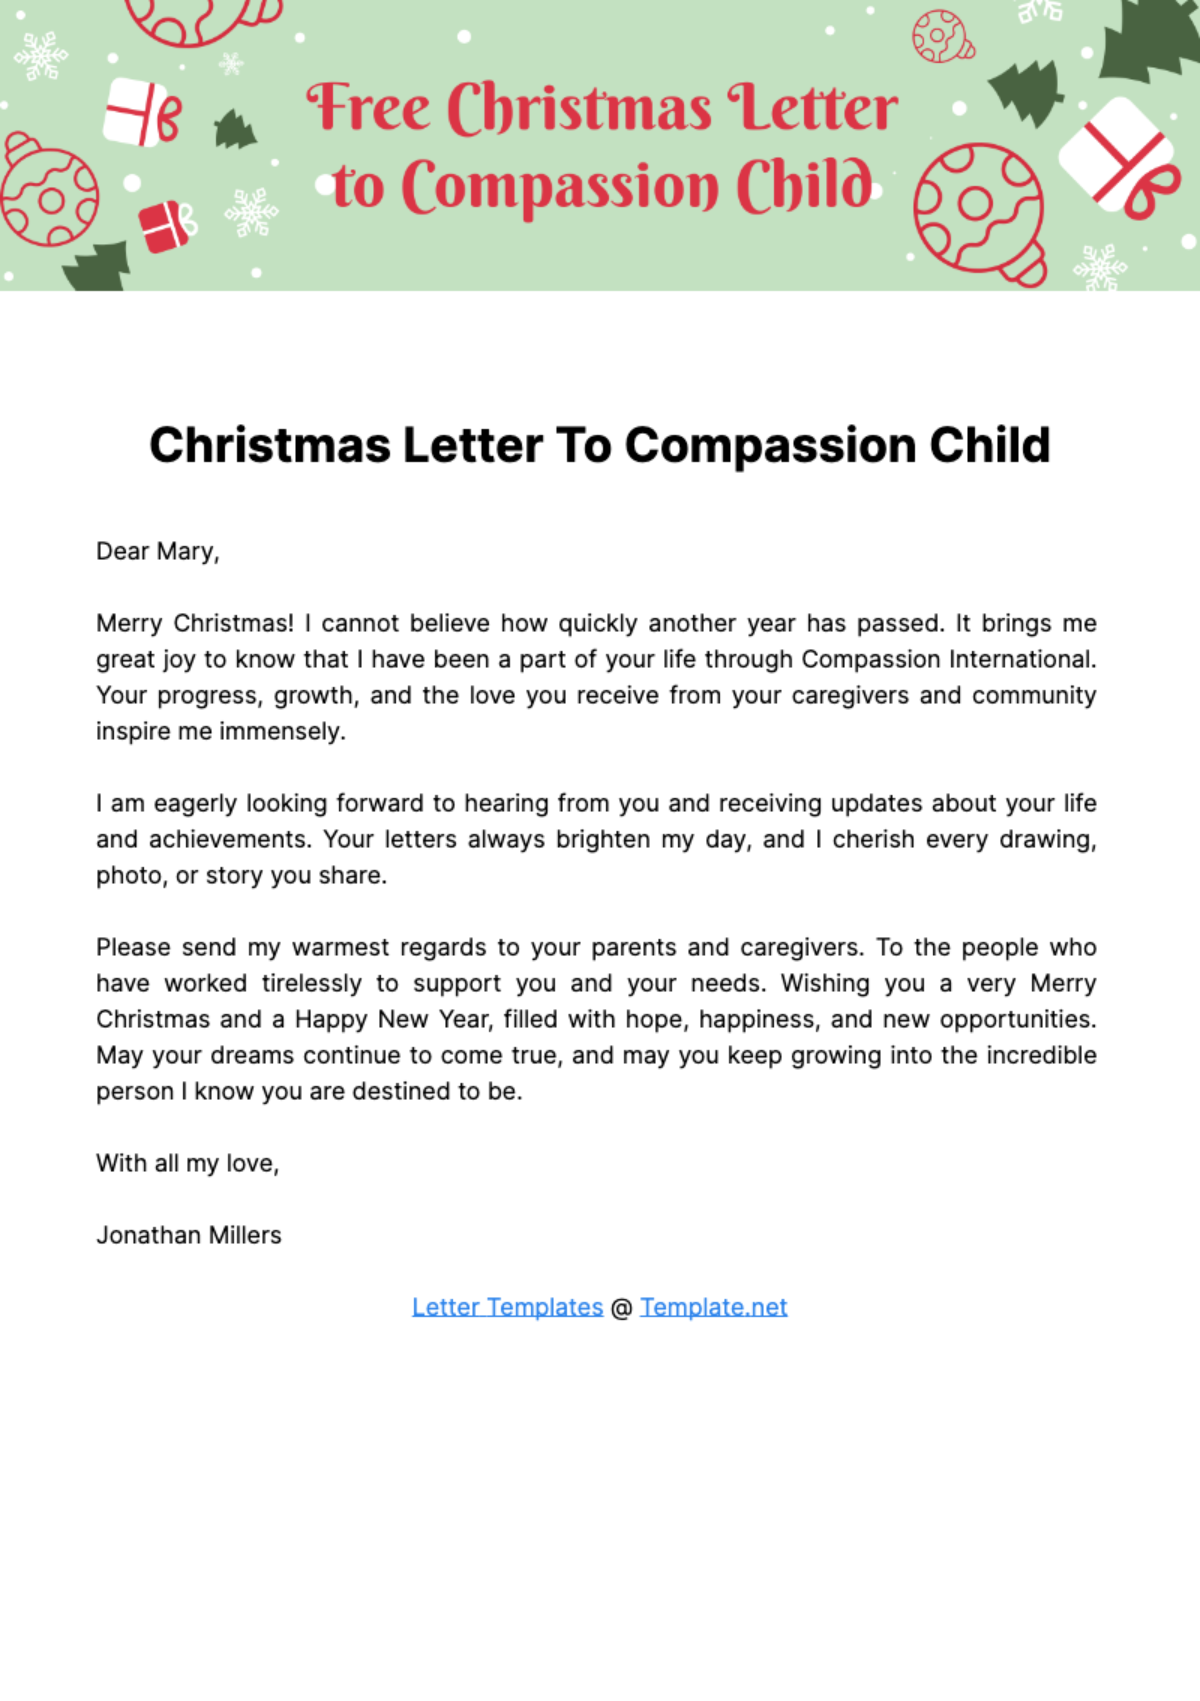 Free Christmas Letter to Compassion Child Template